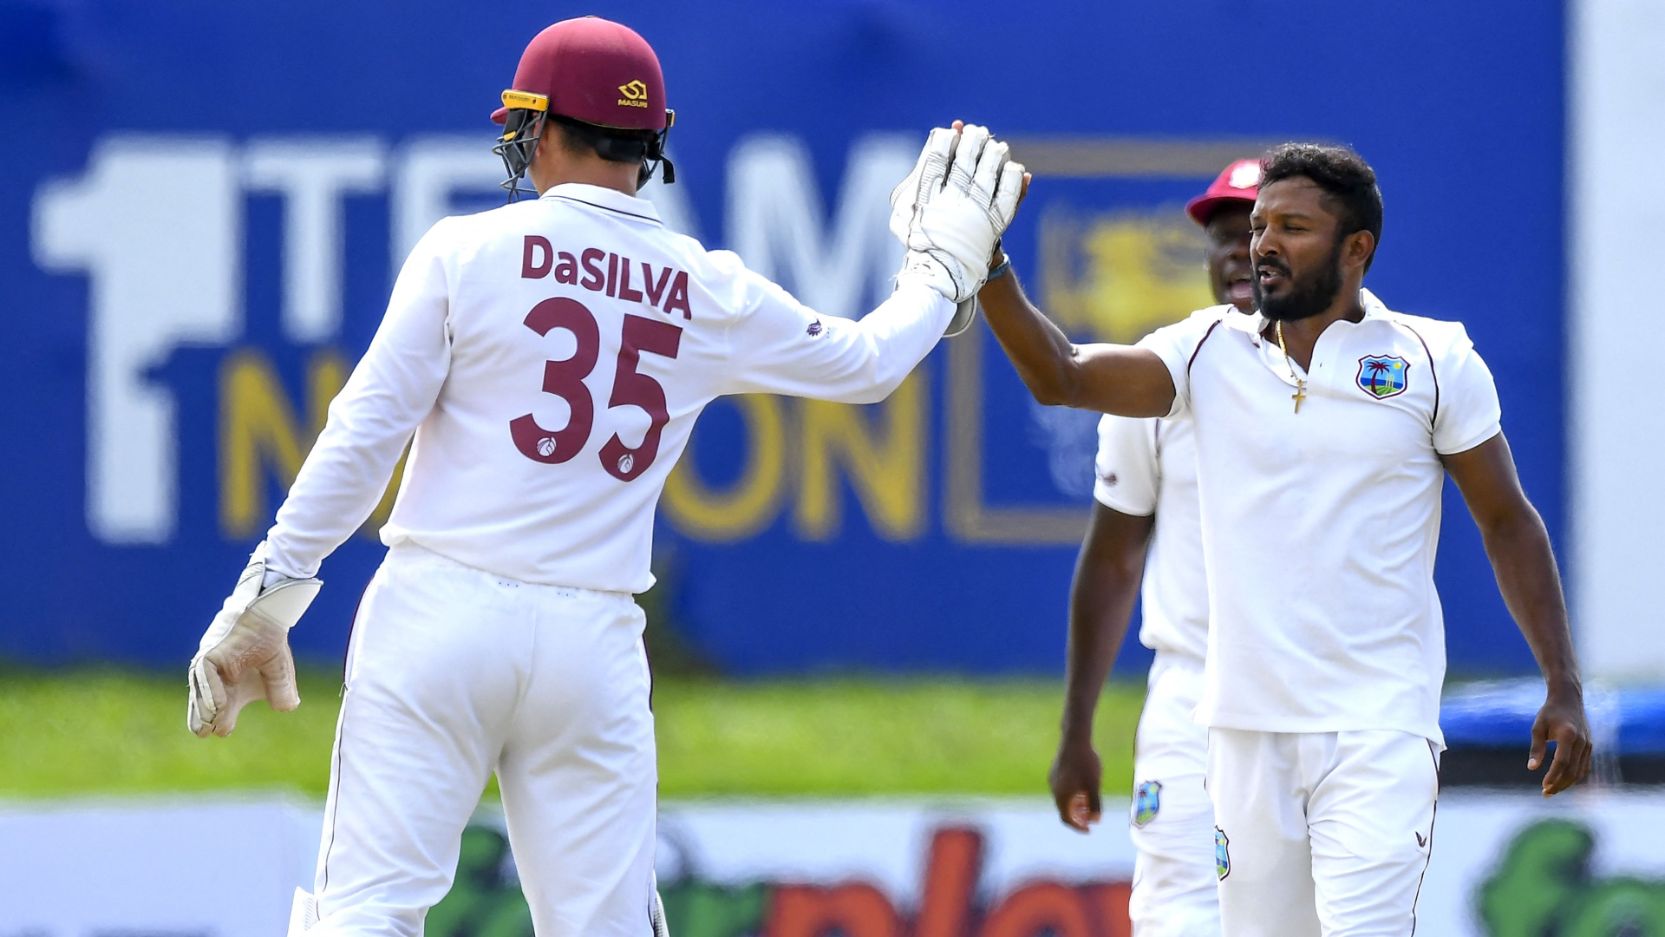 SL vs WI | 2nd Test: Spin duo Permaul and Warrican dismantle Sri Lanka for 204